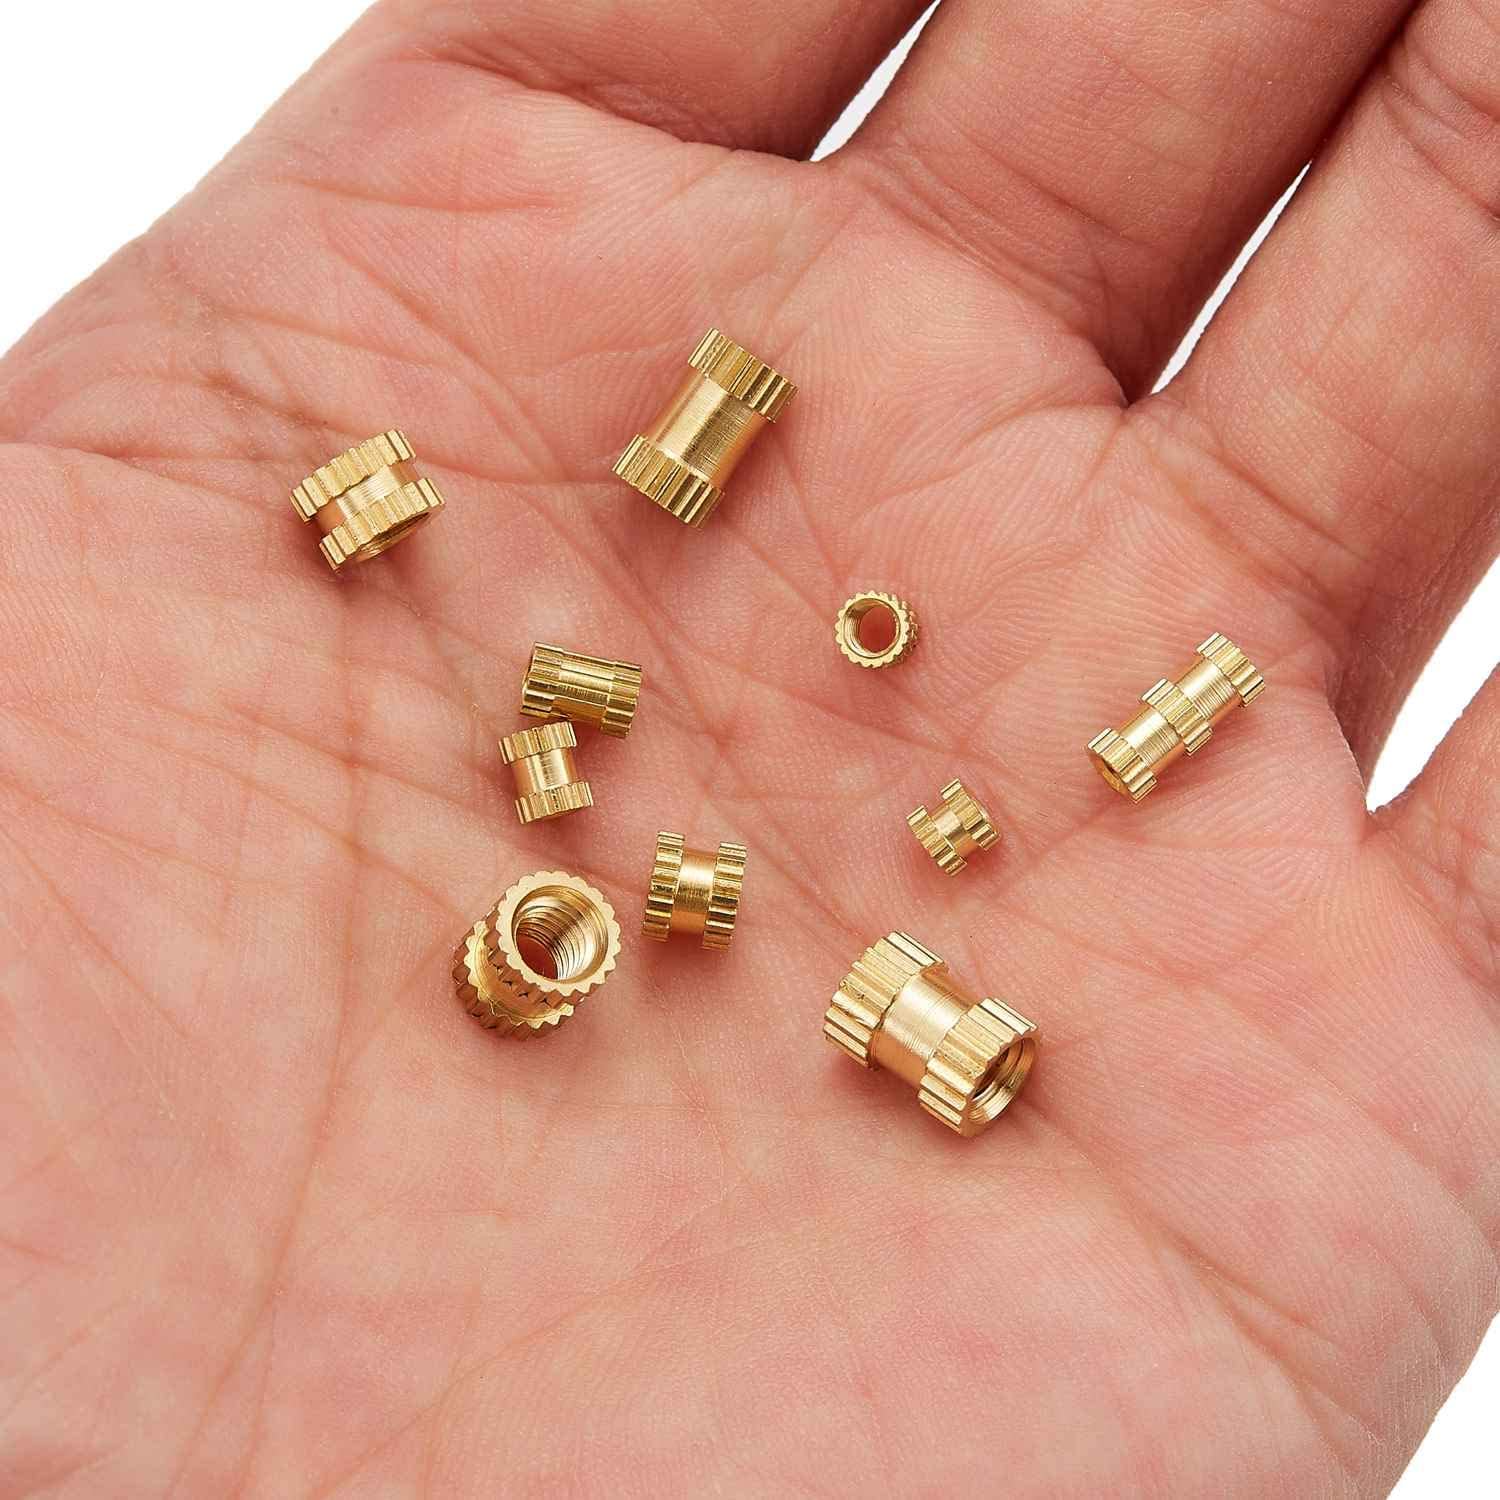 Wholesale m4 brass inserts Of Various Designs and Uses 